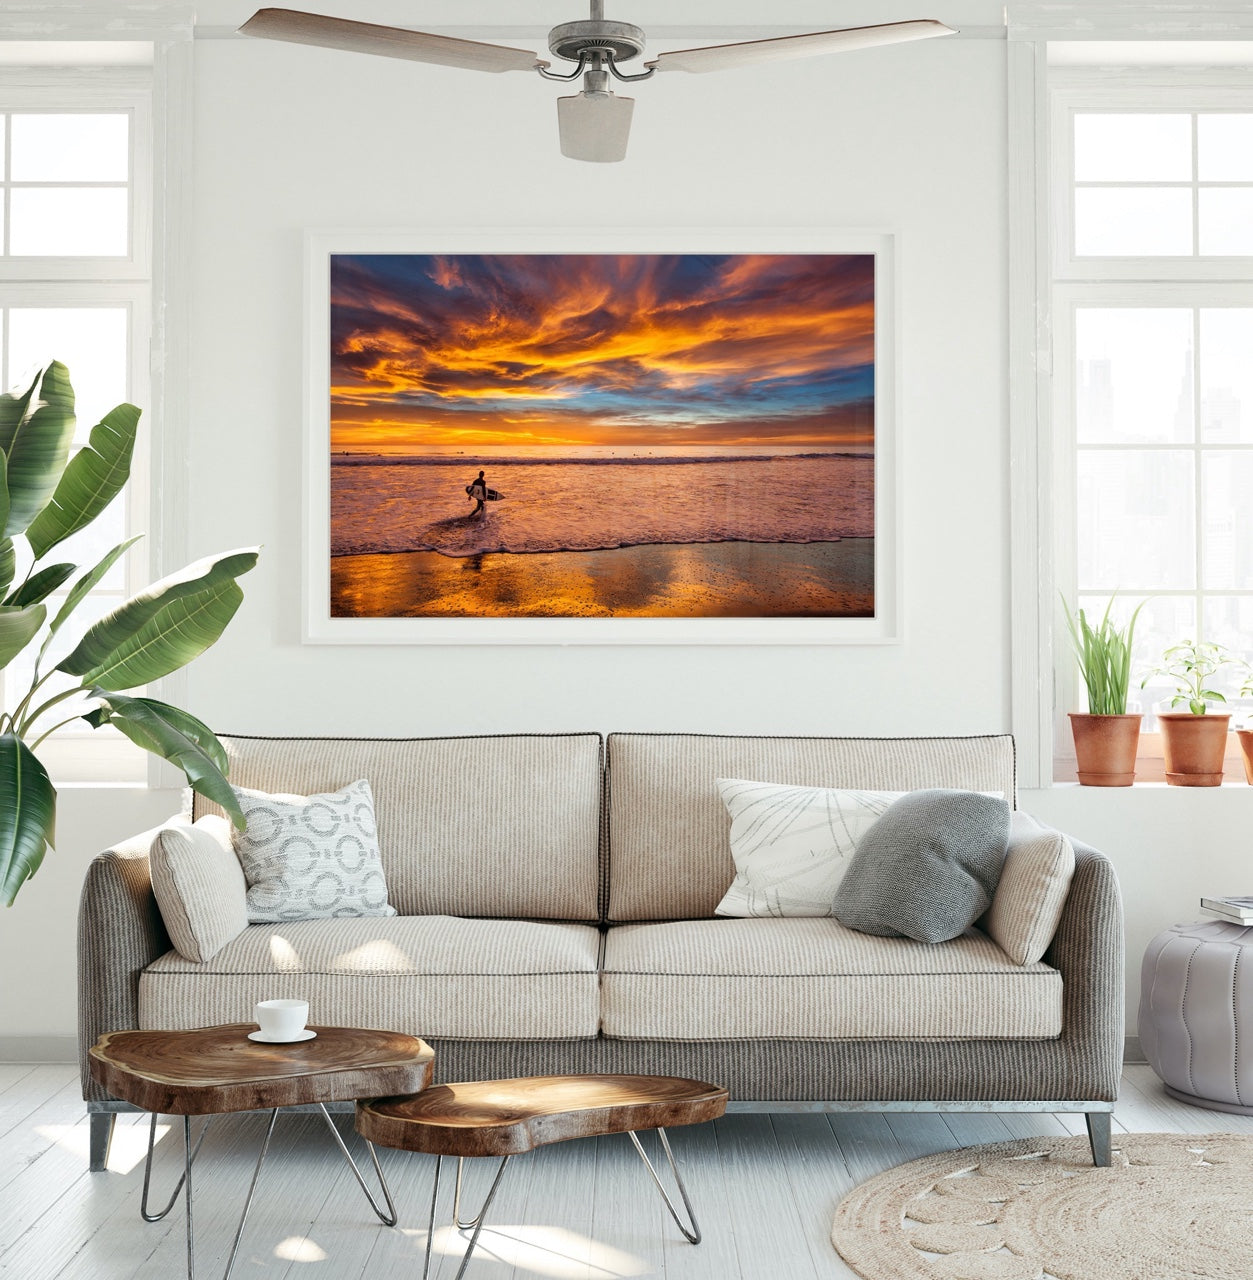 Top 10 Summer Decor Trends - MK Envision Galleries